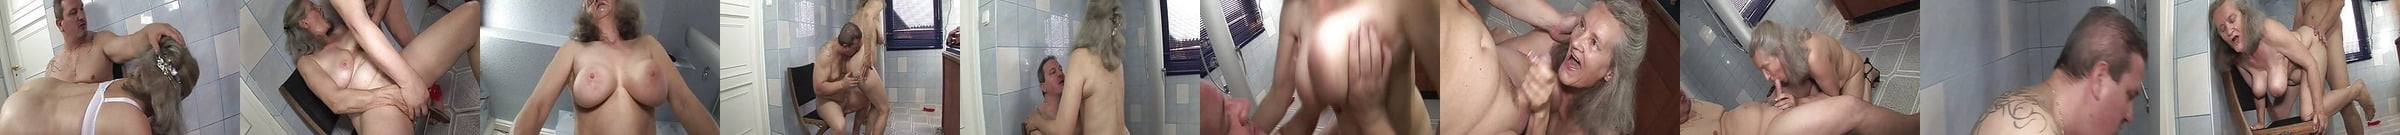 Shameless Sex With Granny In The Bathromm Free Hd Porn 8a Jp 